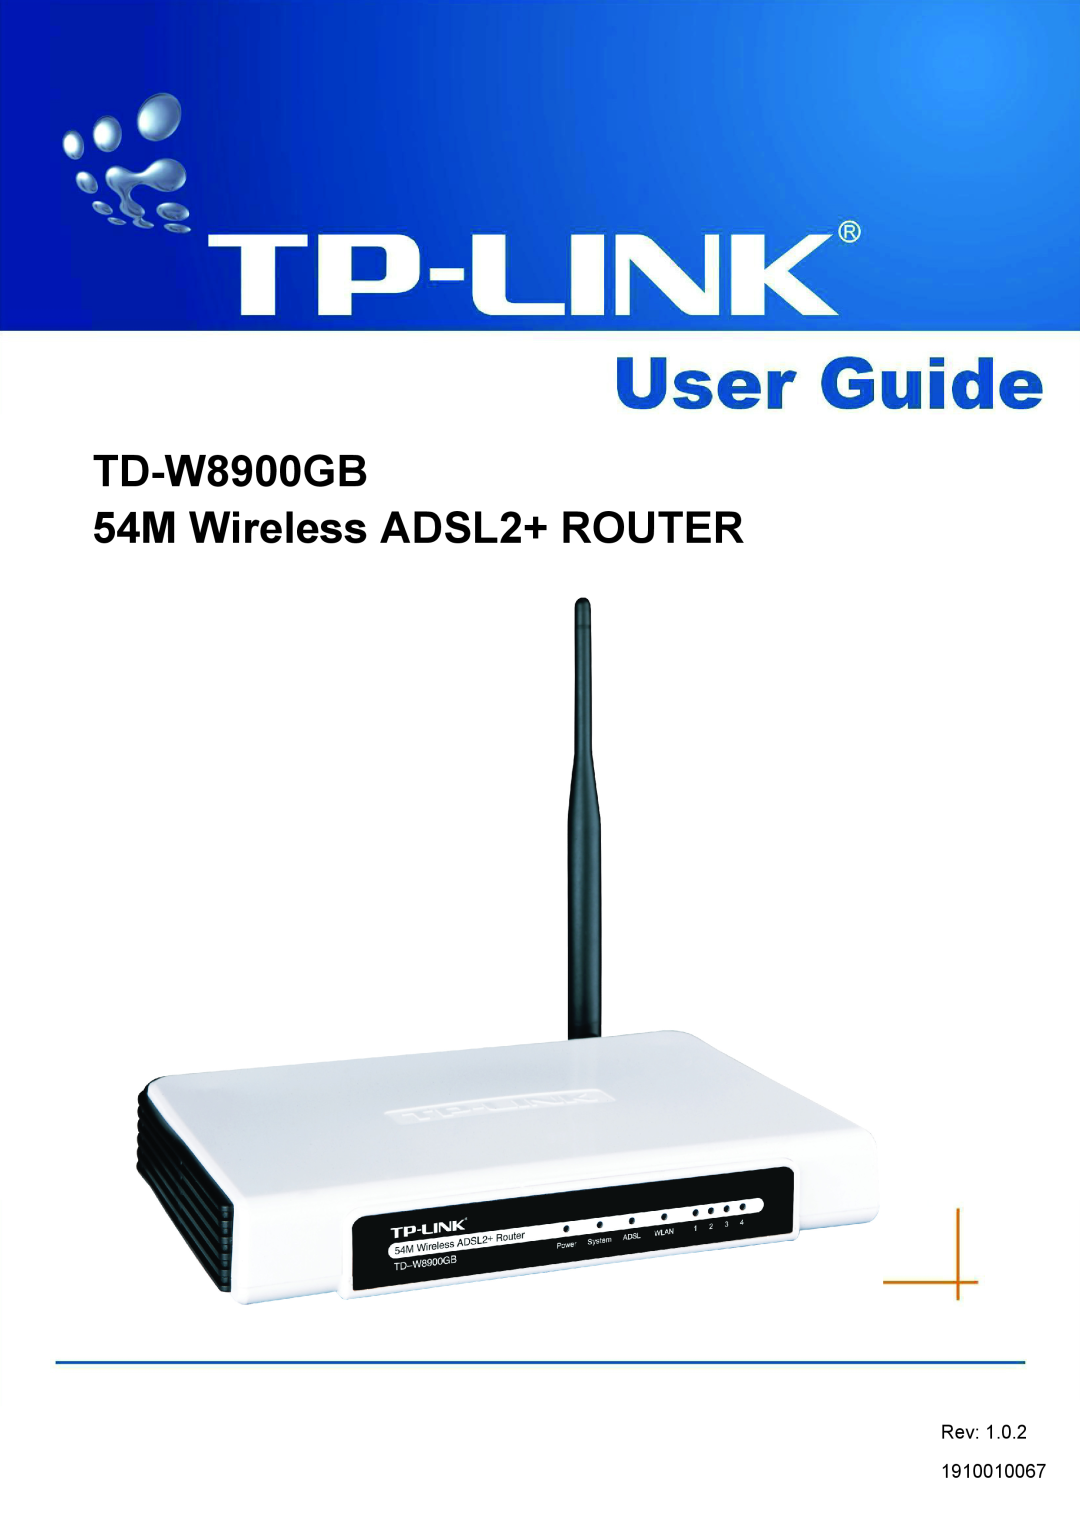 TP-Link manual TD-W8900GB 54M Wireless ADSL2+ ROUTER, Rev 1910010067 